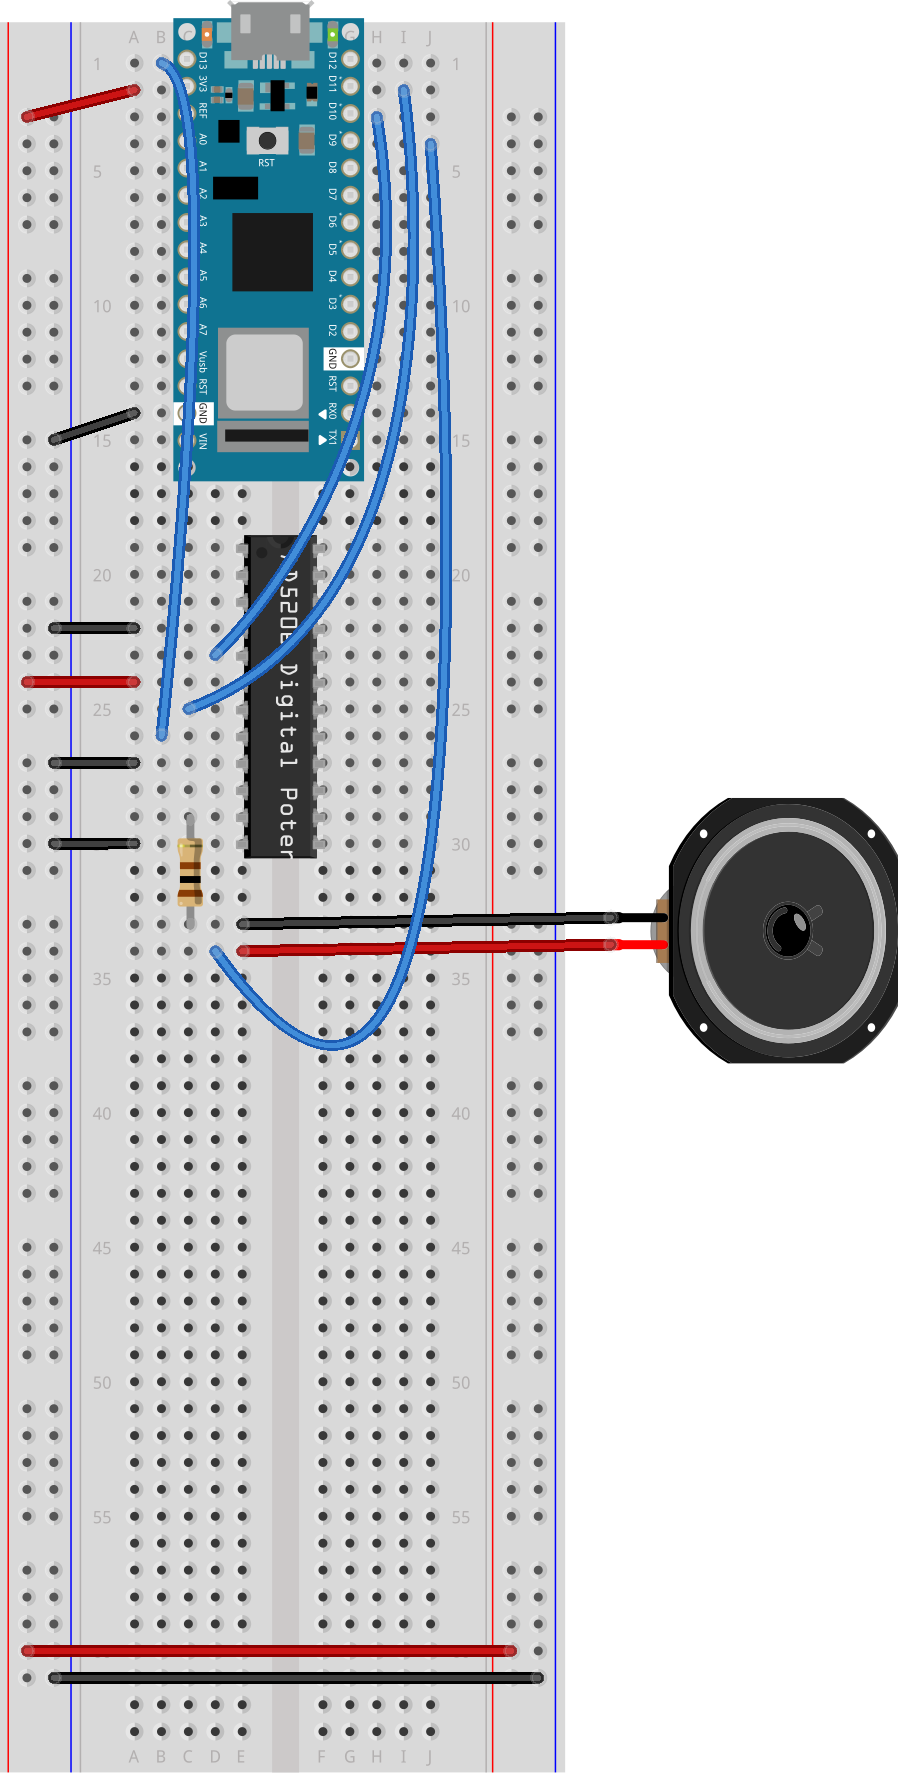 Figure Schematic of an Arduino attached to a AD5206 Potentiometer and a speaker. The Arduino's ground is attached the the potentiometer's A5, Vss, and Ground pins, numbered 12, 9, and 4, respectively. The Arduino's D10, D11, and D13 pins are attached to the potentiometer's CS, SDI, and CLK pins, which are numbered 5, 7, and 8, respectively. The potentiometer's Vdd pin, number 6, is connected to 3.3 volts. The Arduino's D9 pin is connected to the negative terminal of a speaker. The speaker's positive terminal is connected to a 100 Ohm resistor, which is connected to the potentiometer's W5 pin, number 11.